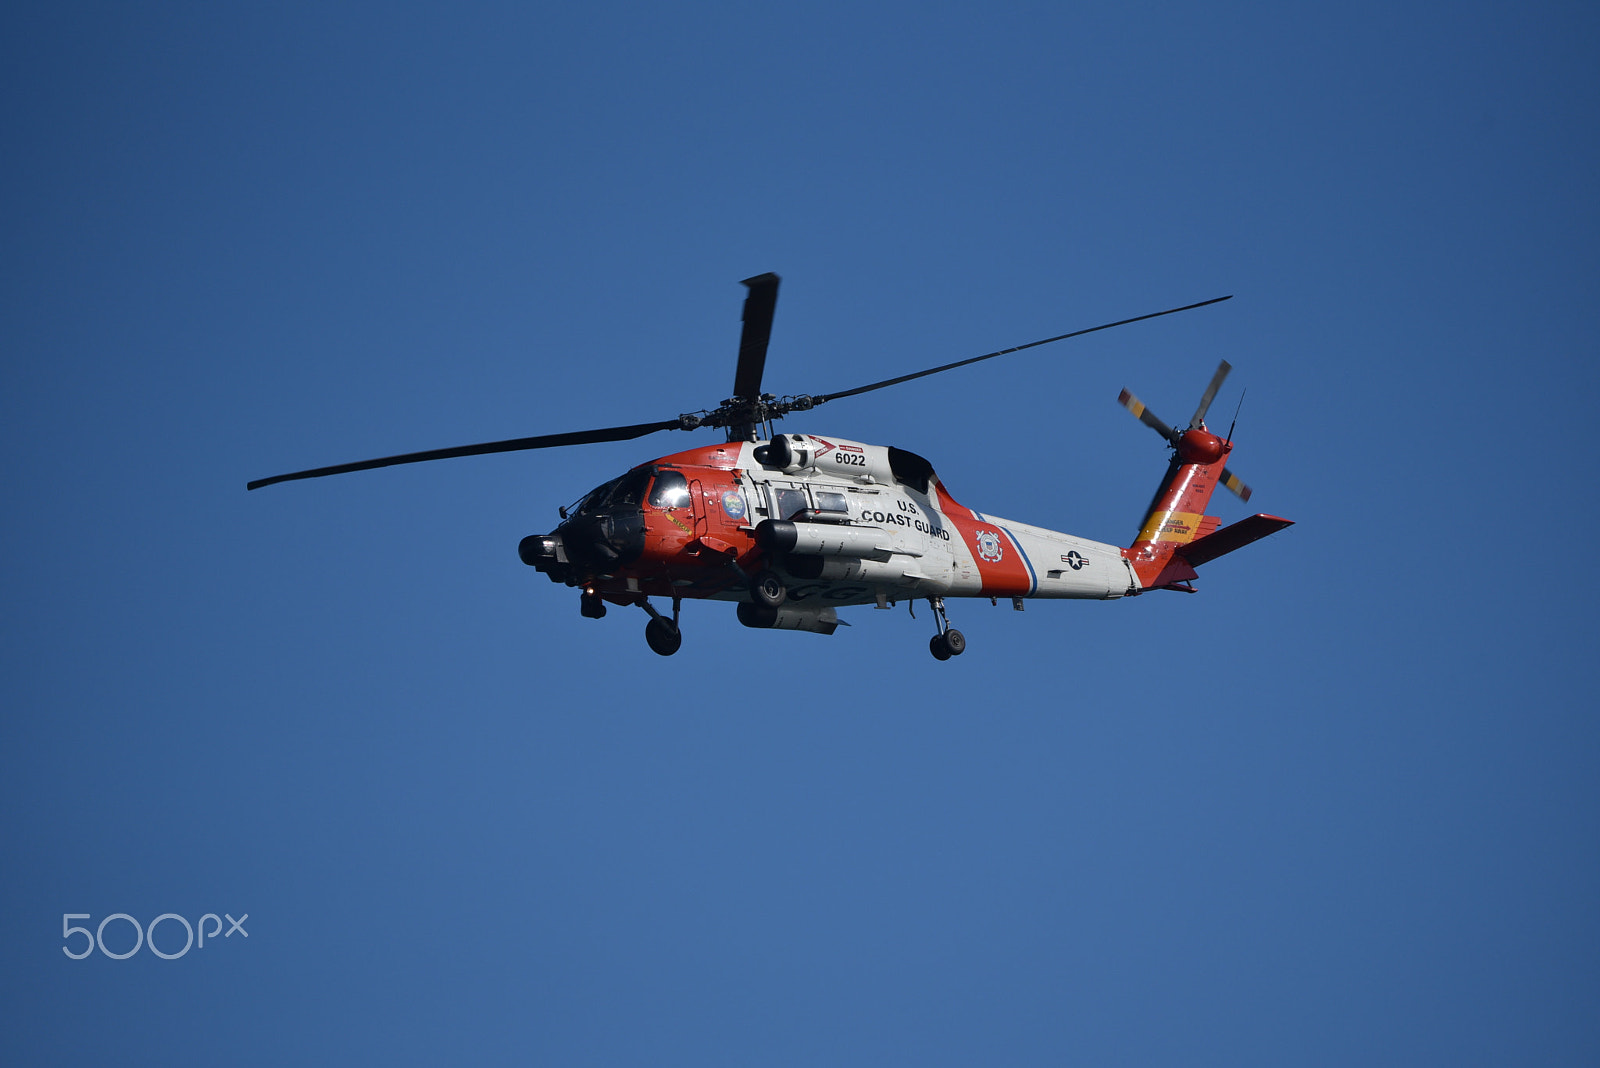 Nikon D750 + Nikon AF-S Nikkor 80-400mm F4.5-5.6G ED VR sample photo. Hh-60 jayhawk helicopter used by us coast guard photography